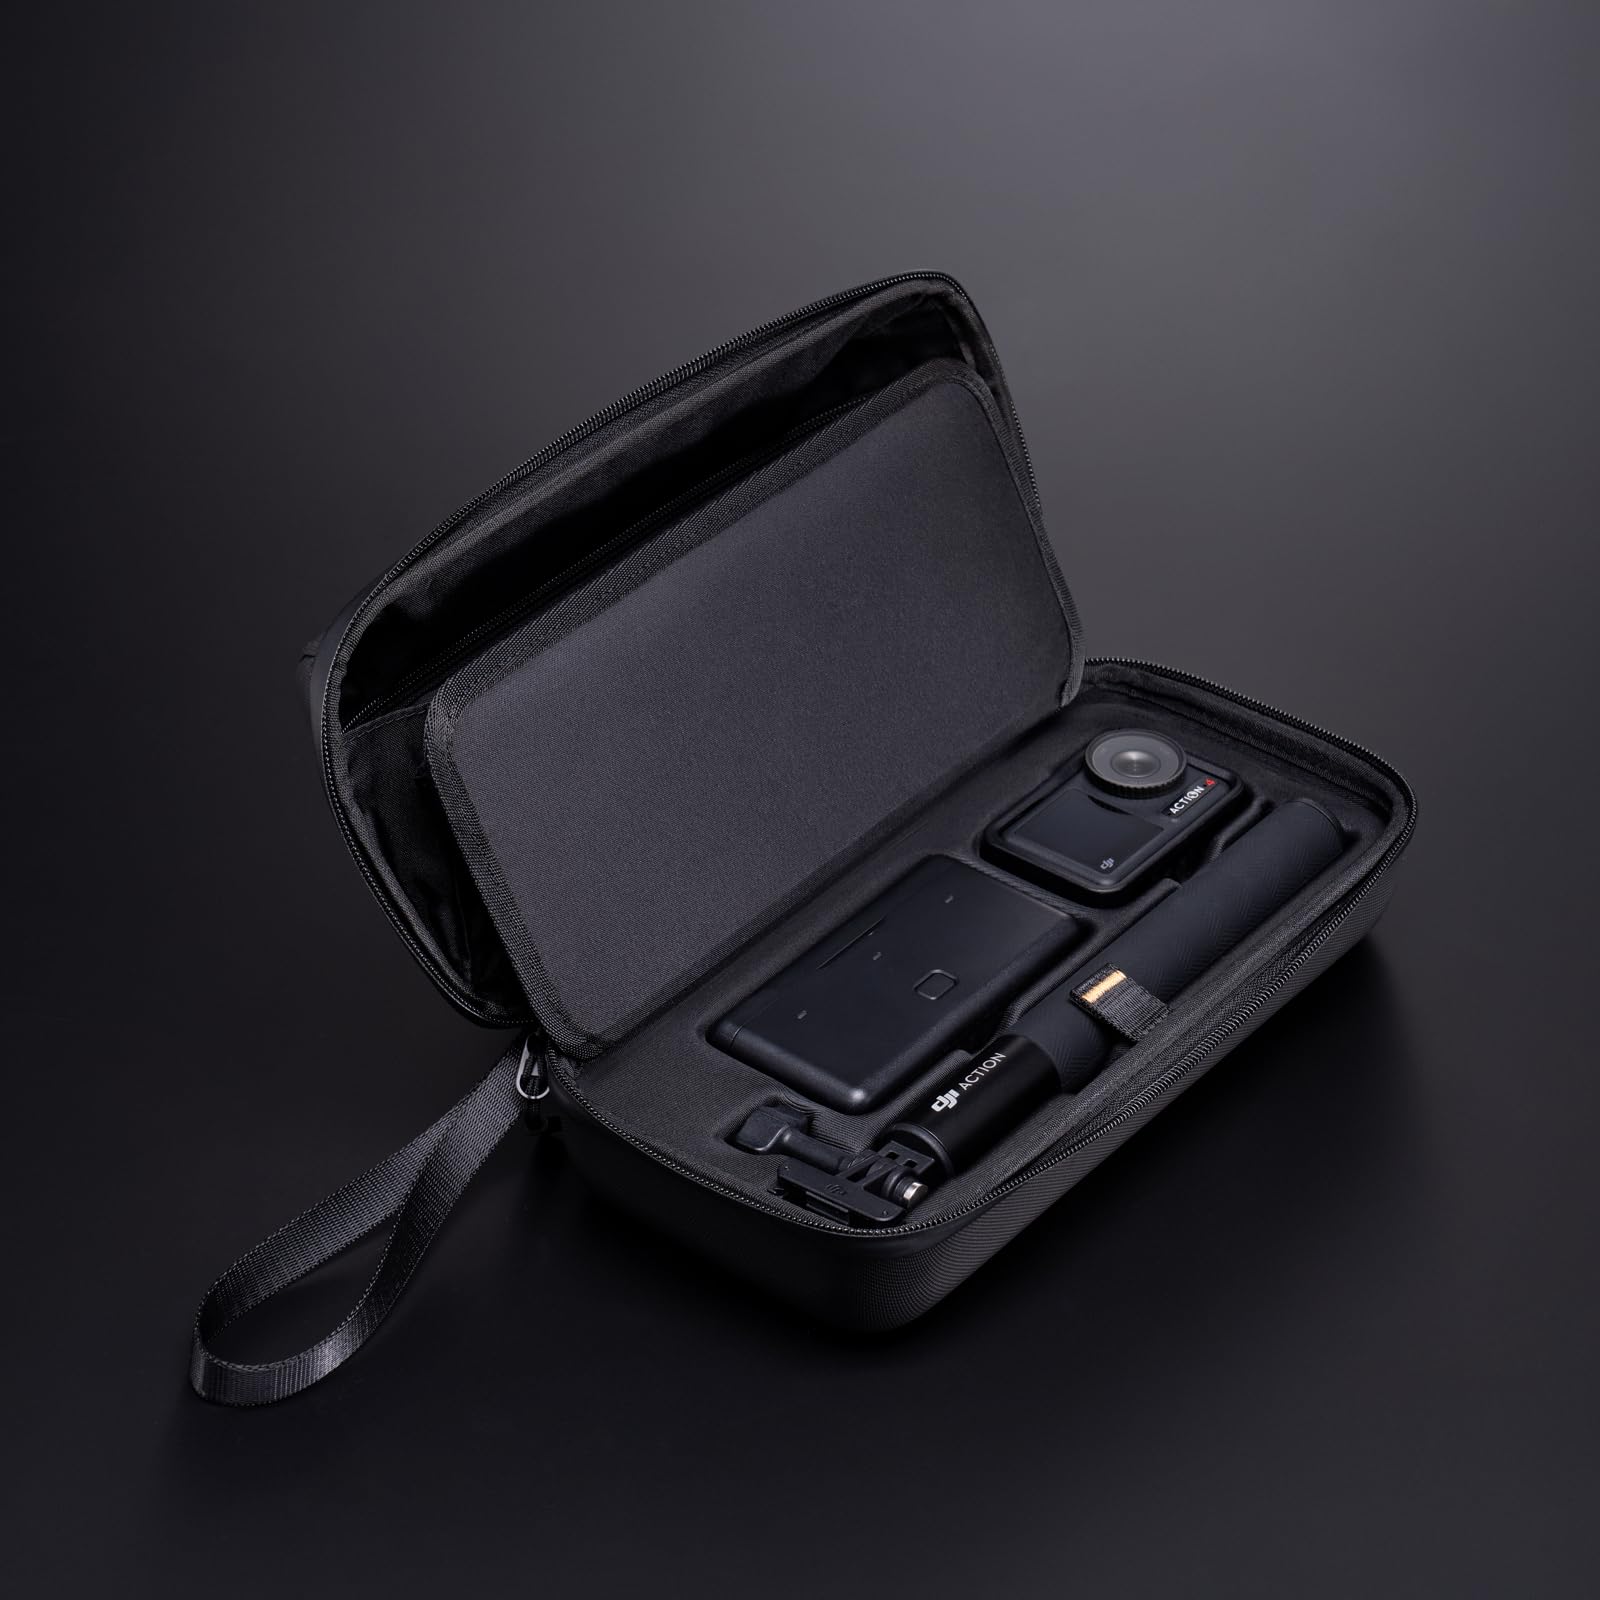 DJI Osmo Action Carrying Bag, Compatibility: Osmo Action 3, Osmo Action 4